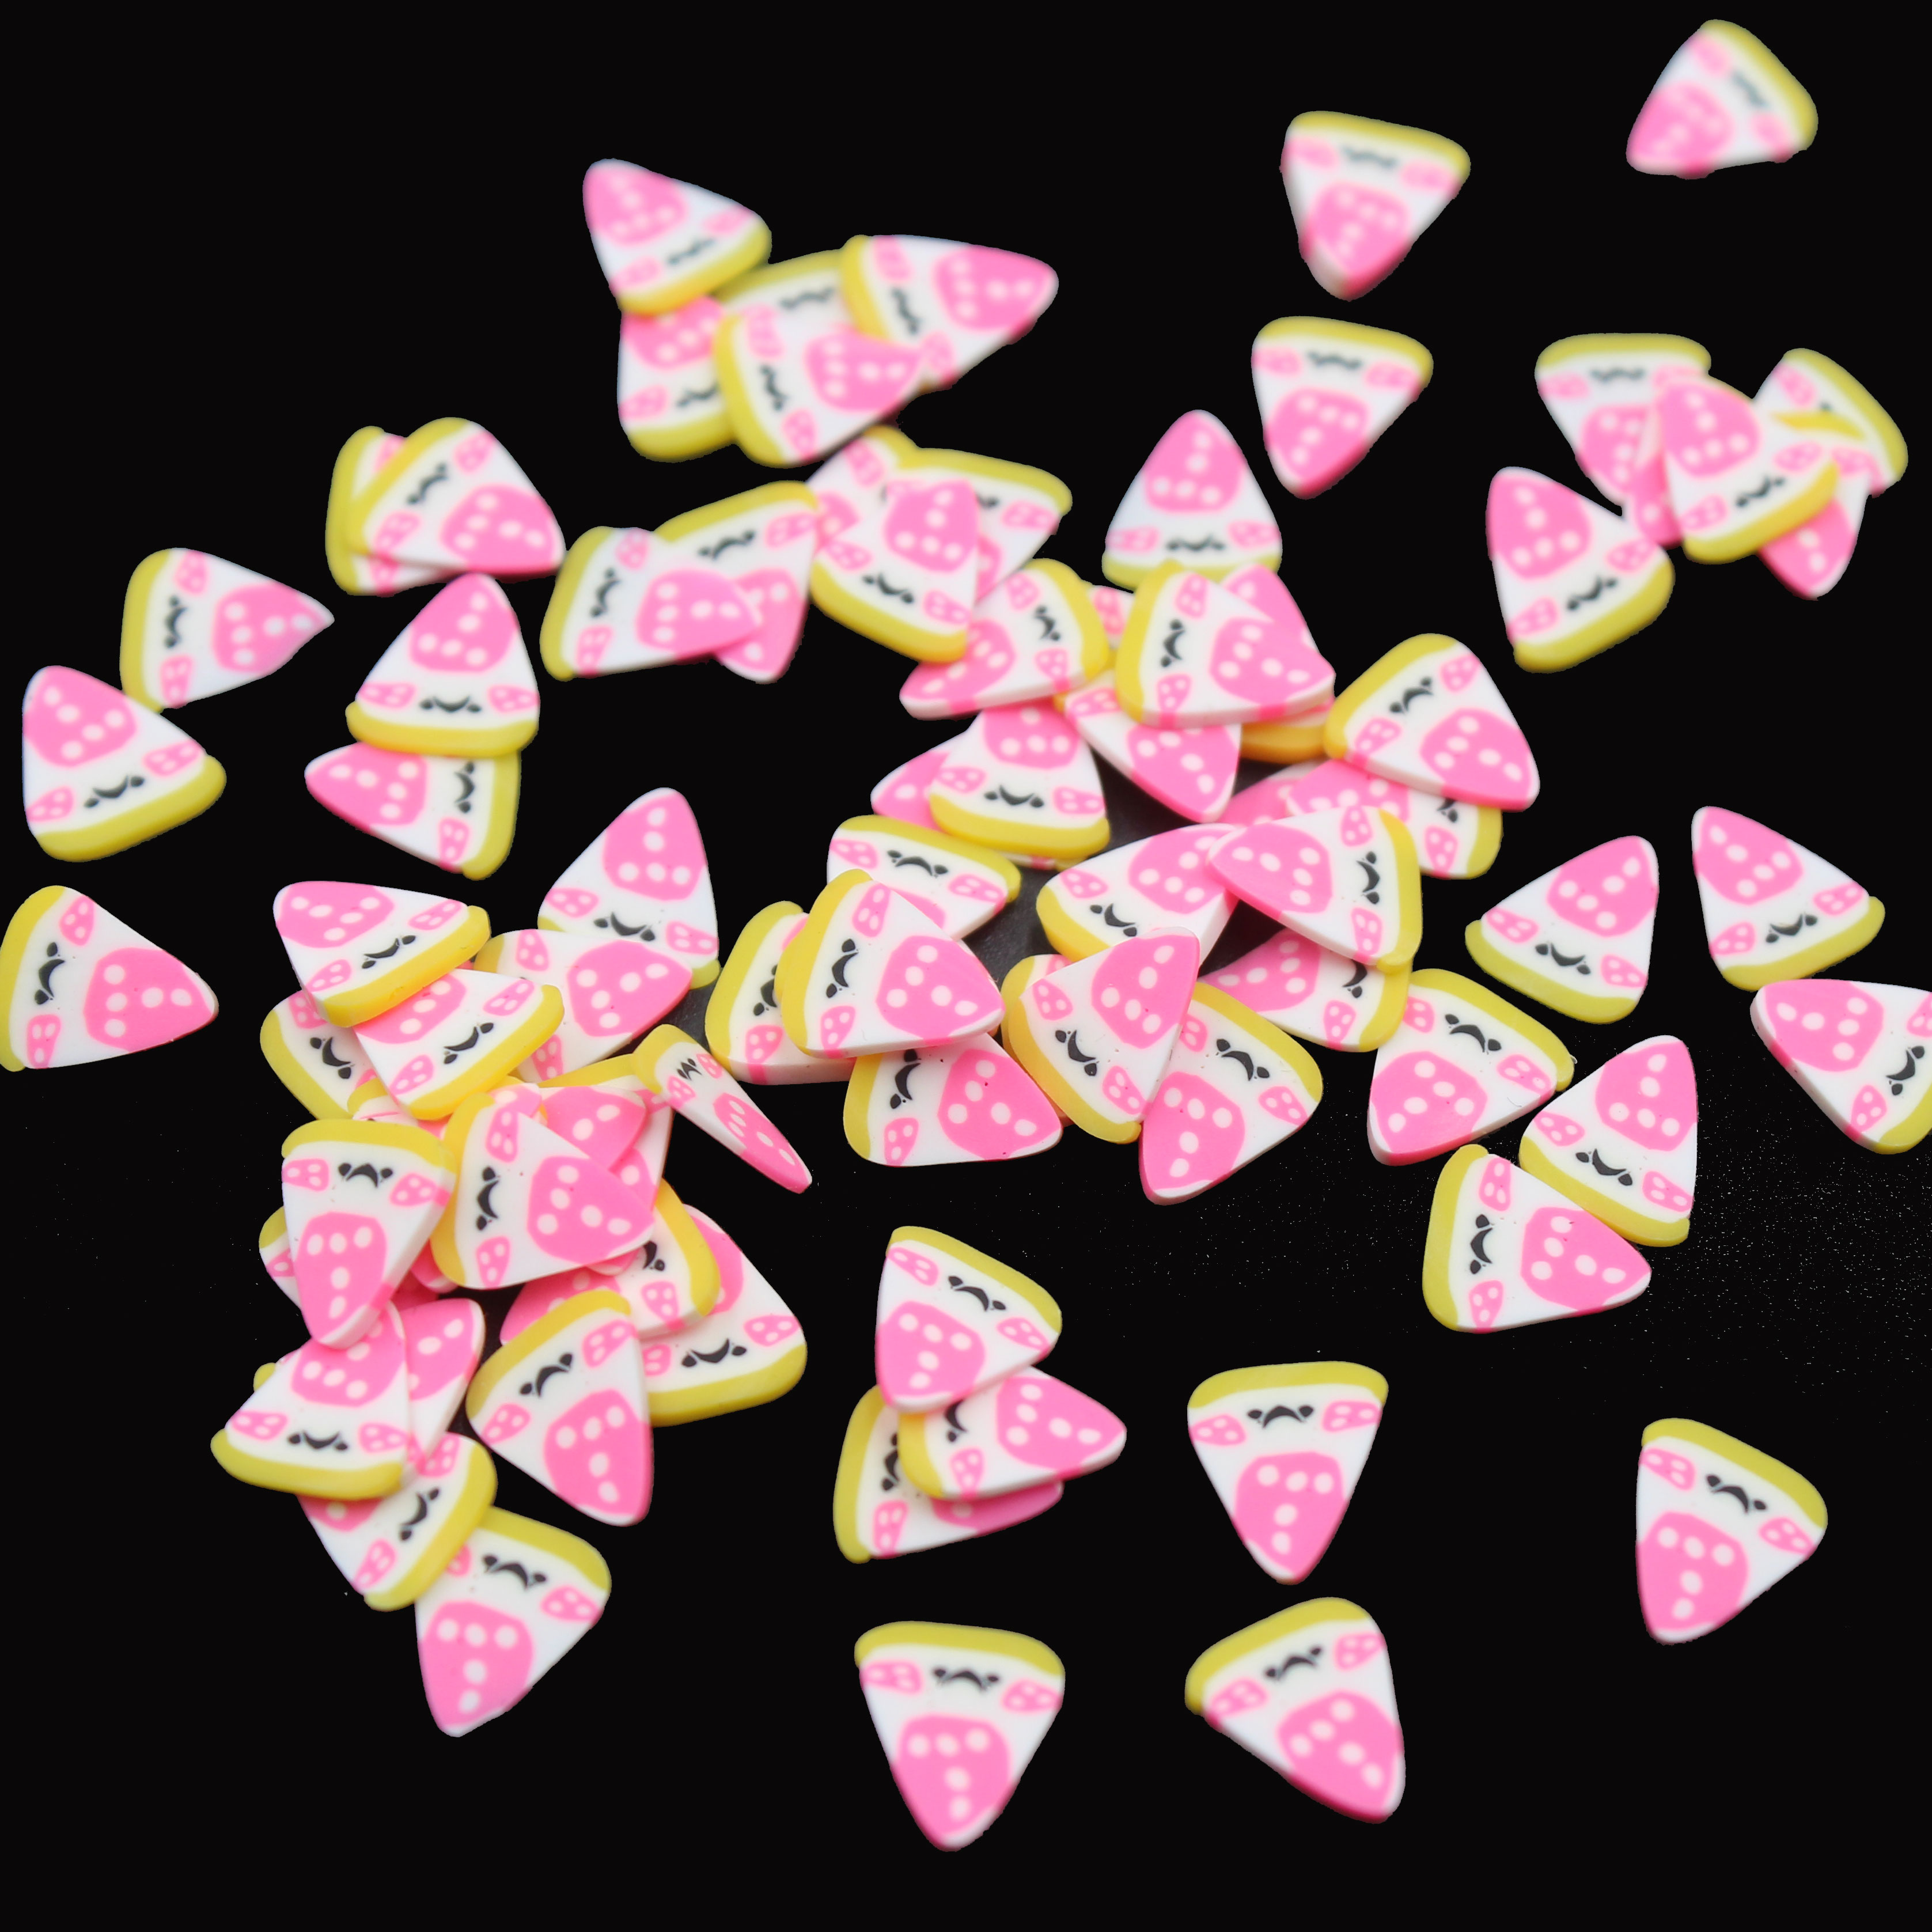 50g/lot Polymer Hot Soft Clay Strawberry Cake Slices Sprinkles for Crafts Making, DIY Filler Accessories